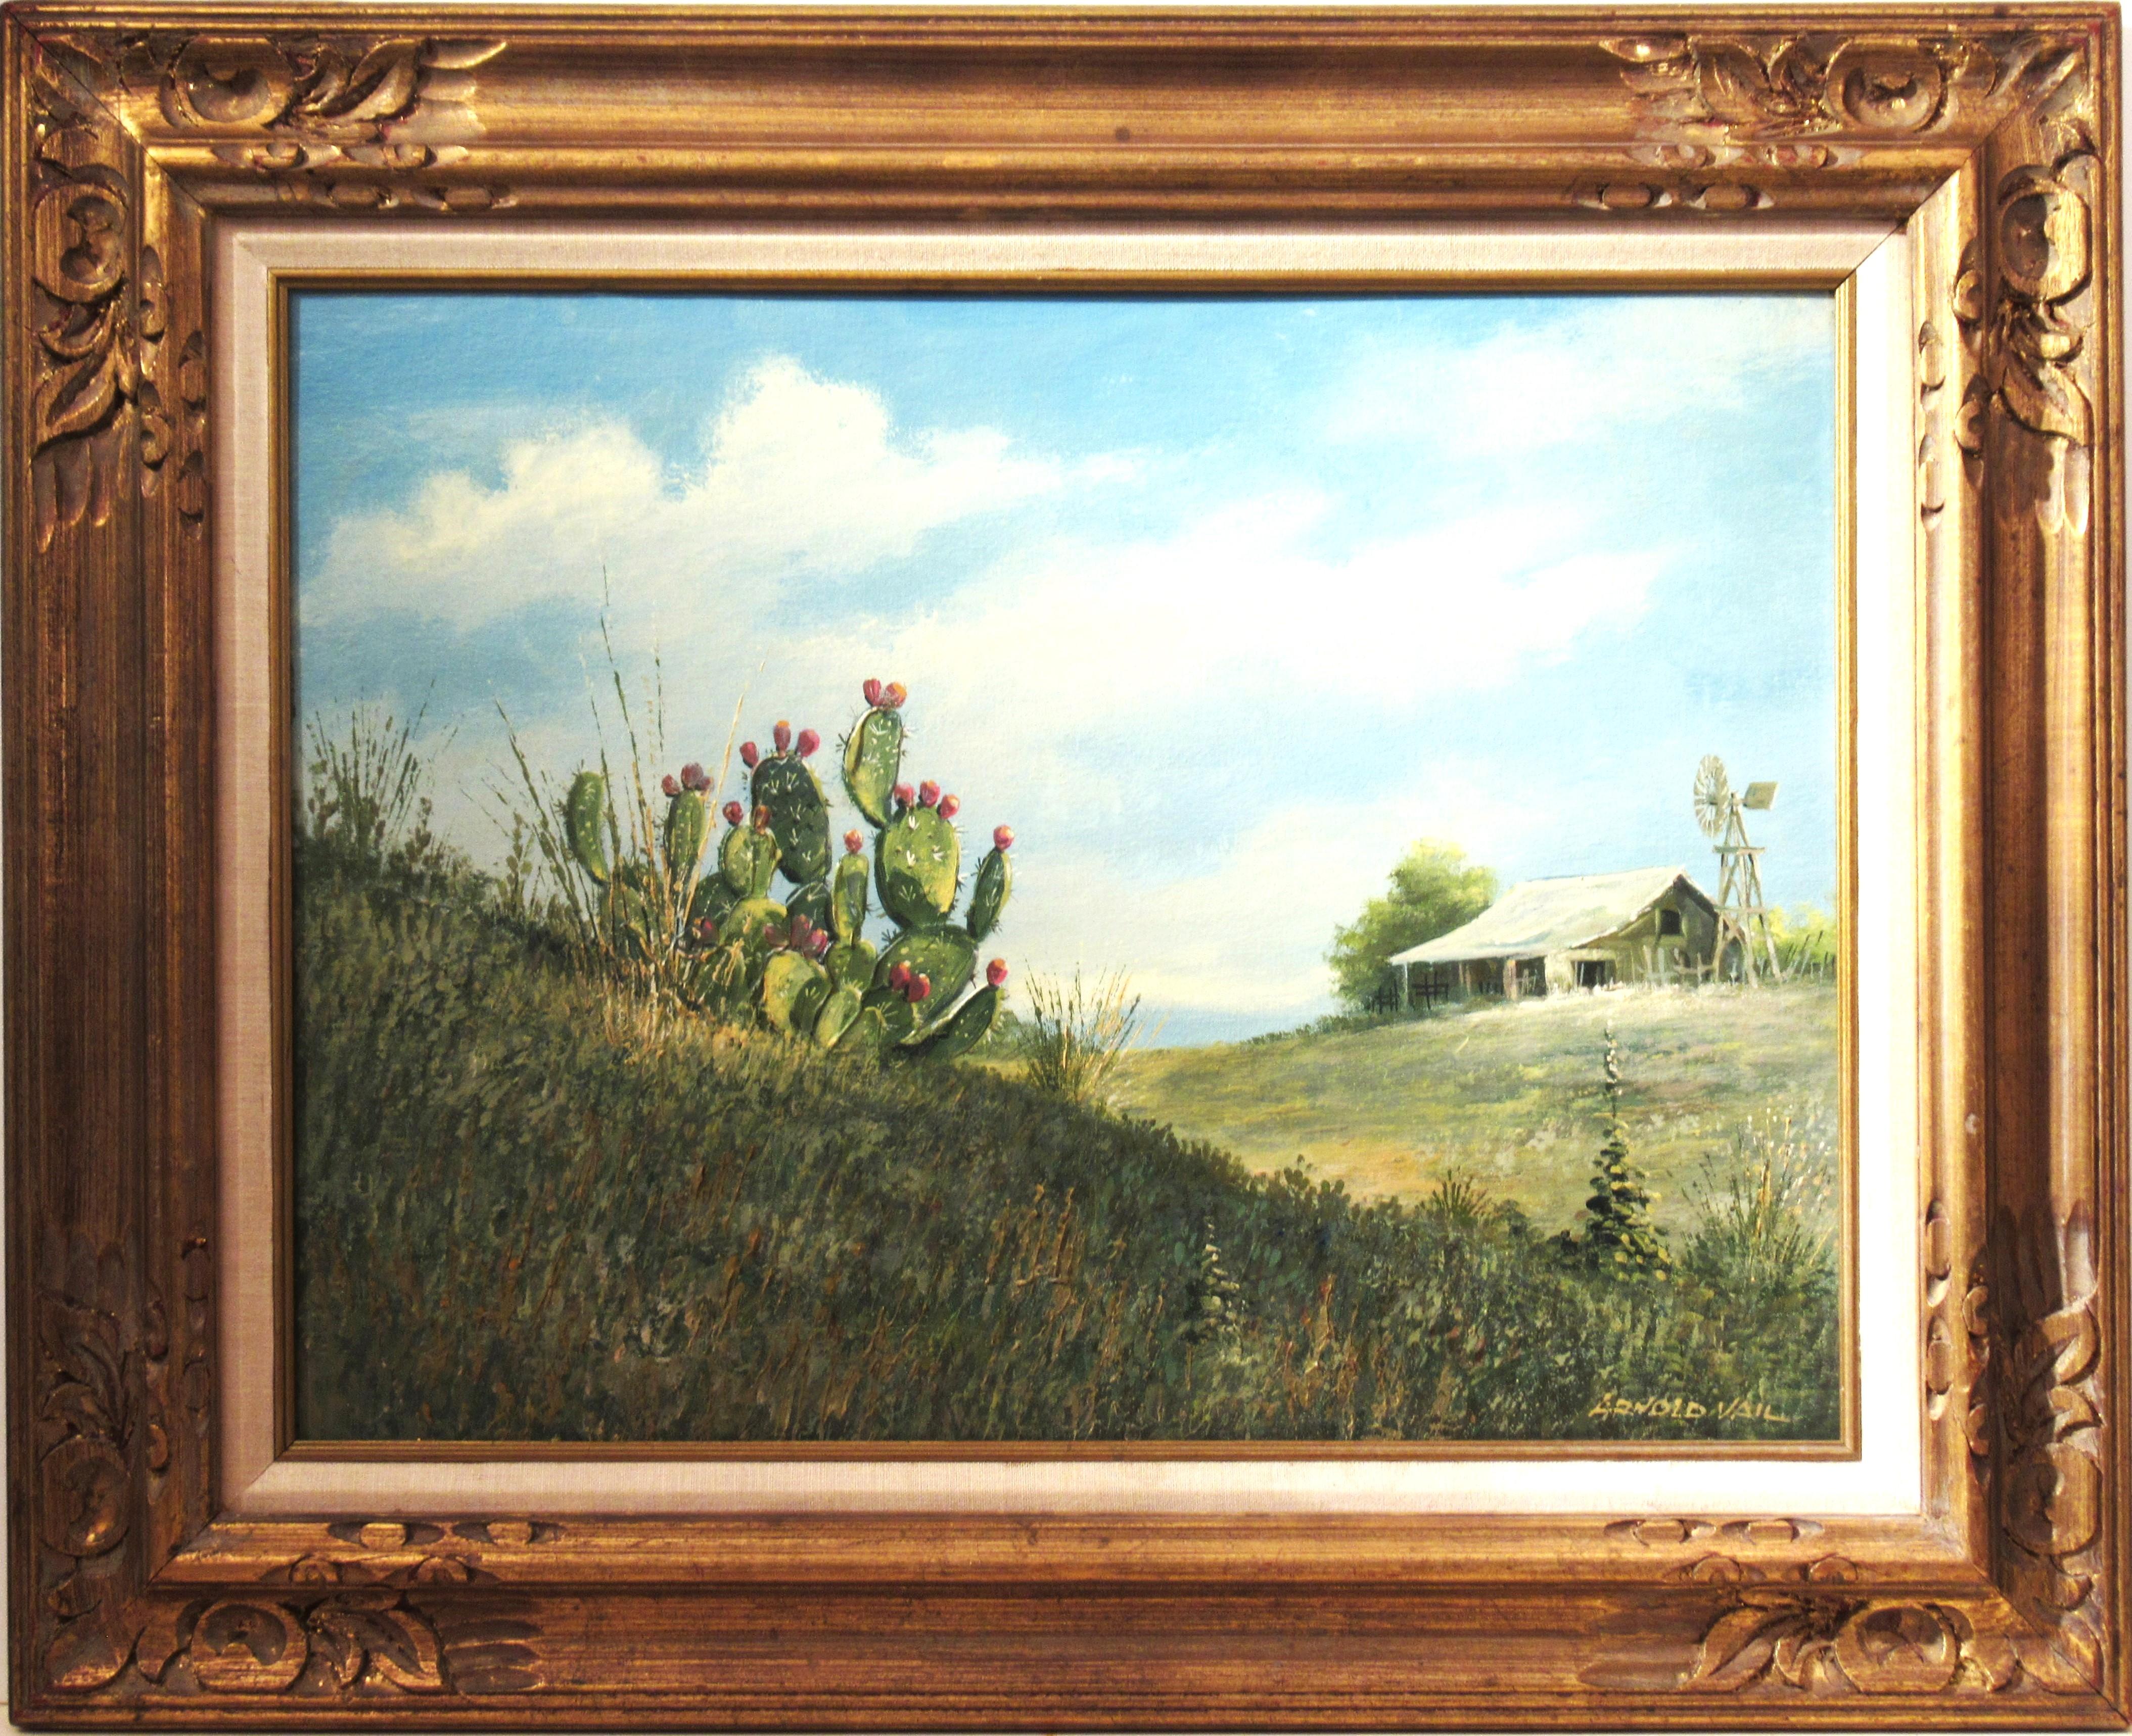 Arnold Vail - Texas Landscape with Cactus For Sale at 1stDibs